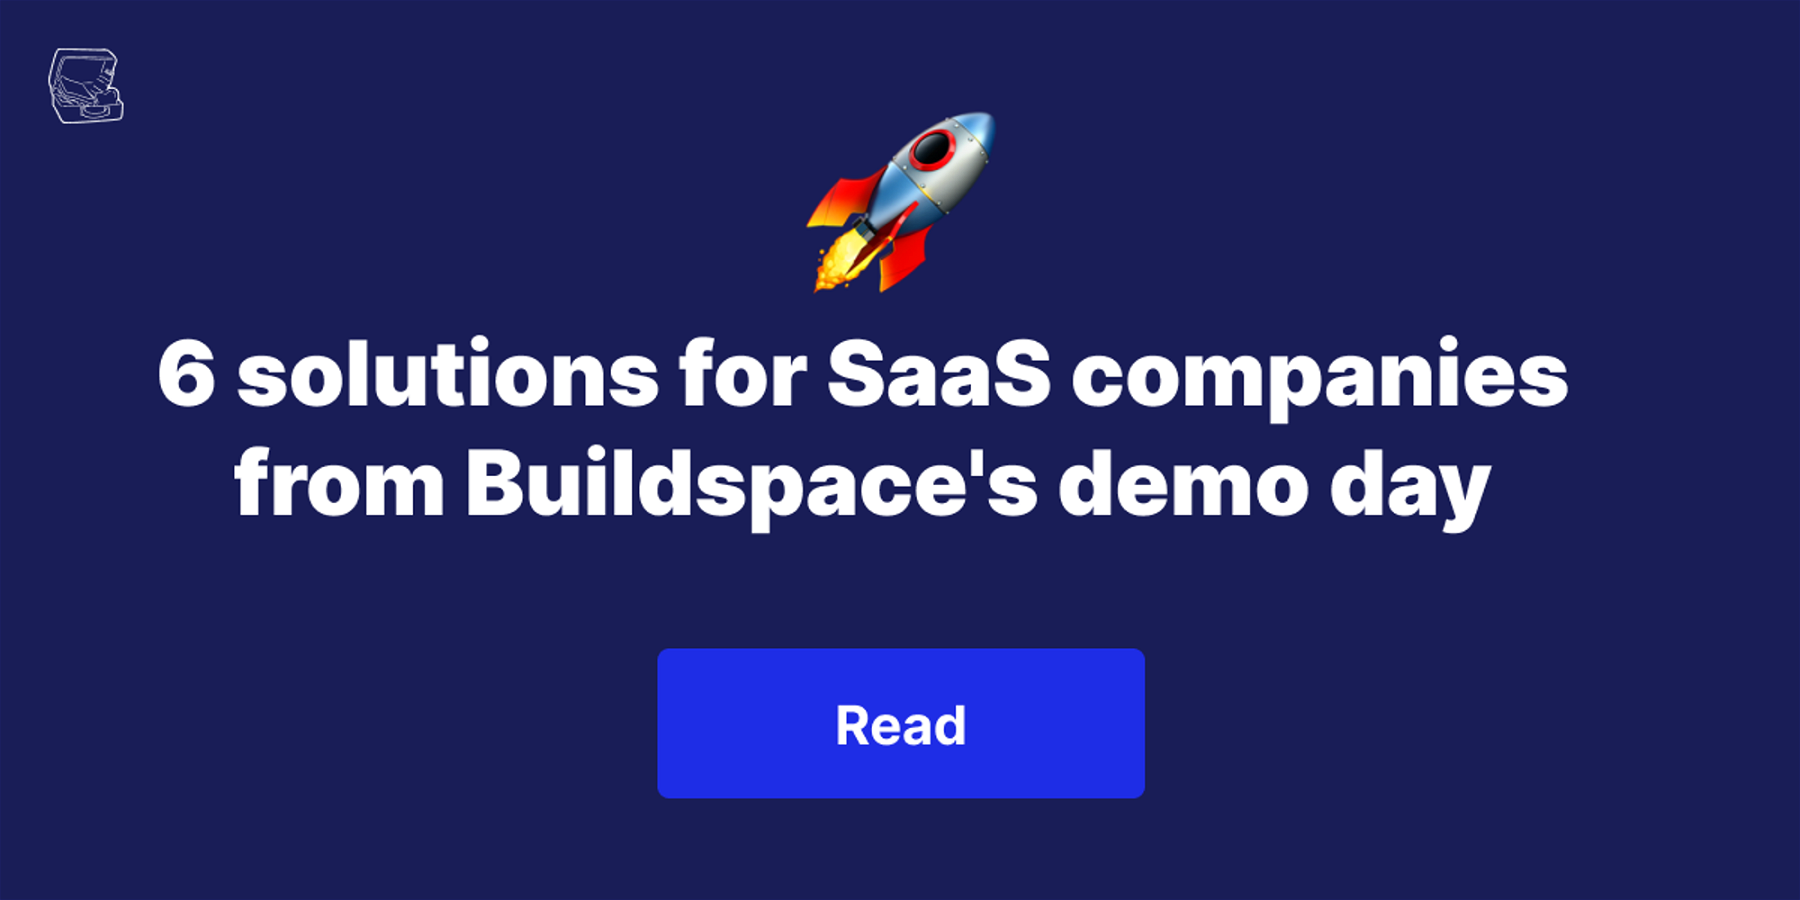 6 solutions for SaaS companies from Buildspace's demo day